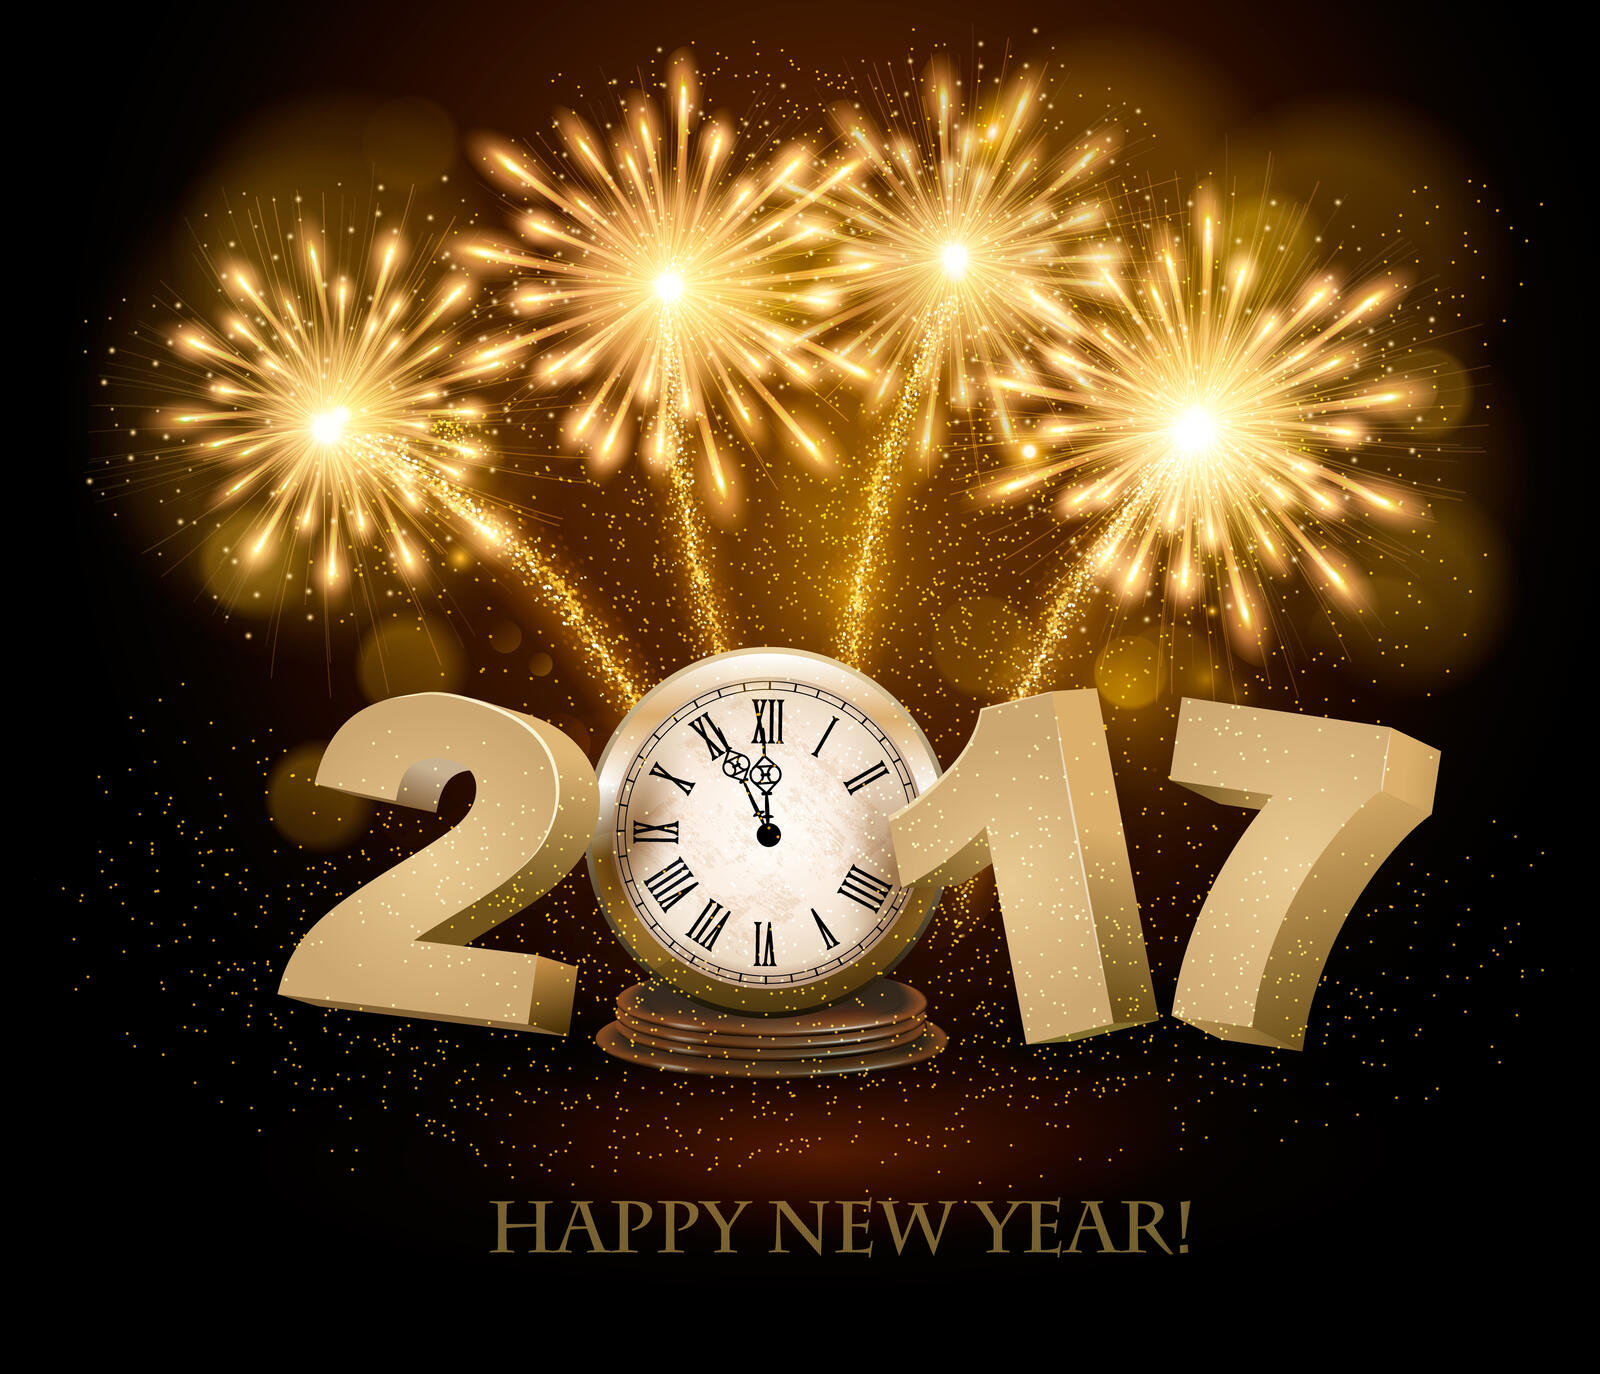 Wallpapers 2017 new year wallpapers with the new 2017 year on the desktop